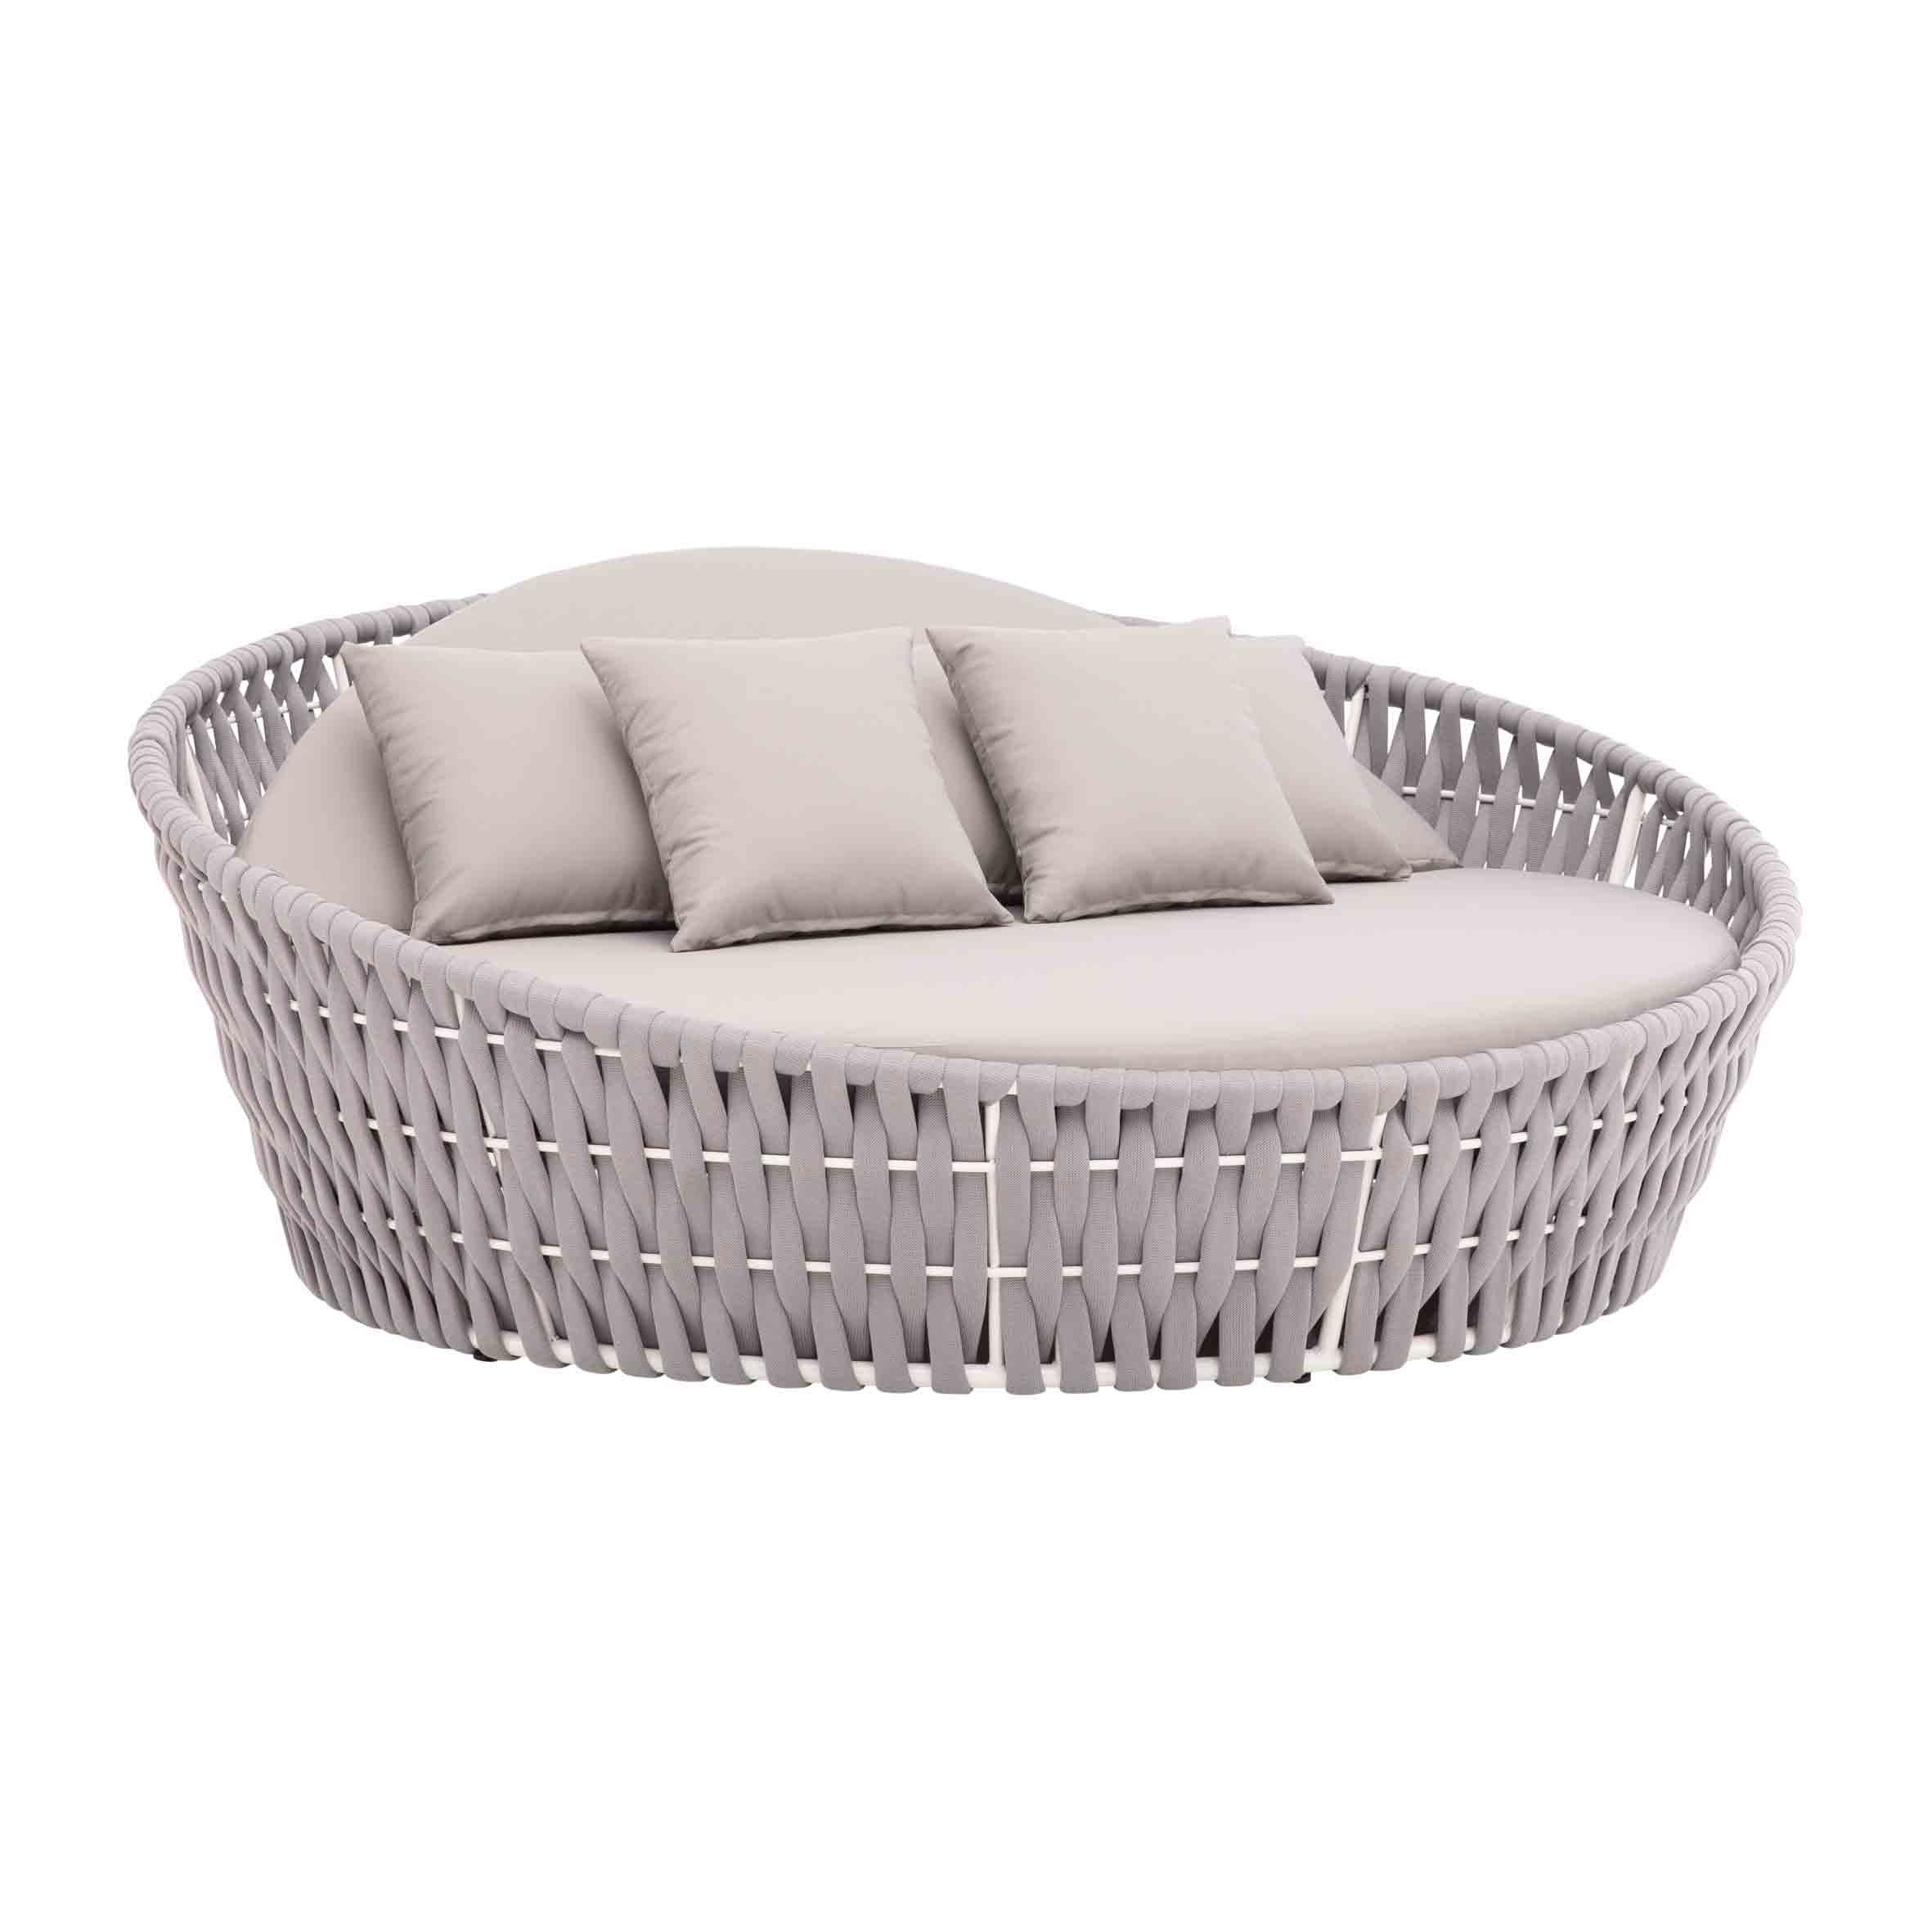 Adjusted Backrest Round Rope Outdoor Daybed | Shinlin Round Sun Lounger TC001-B